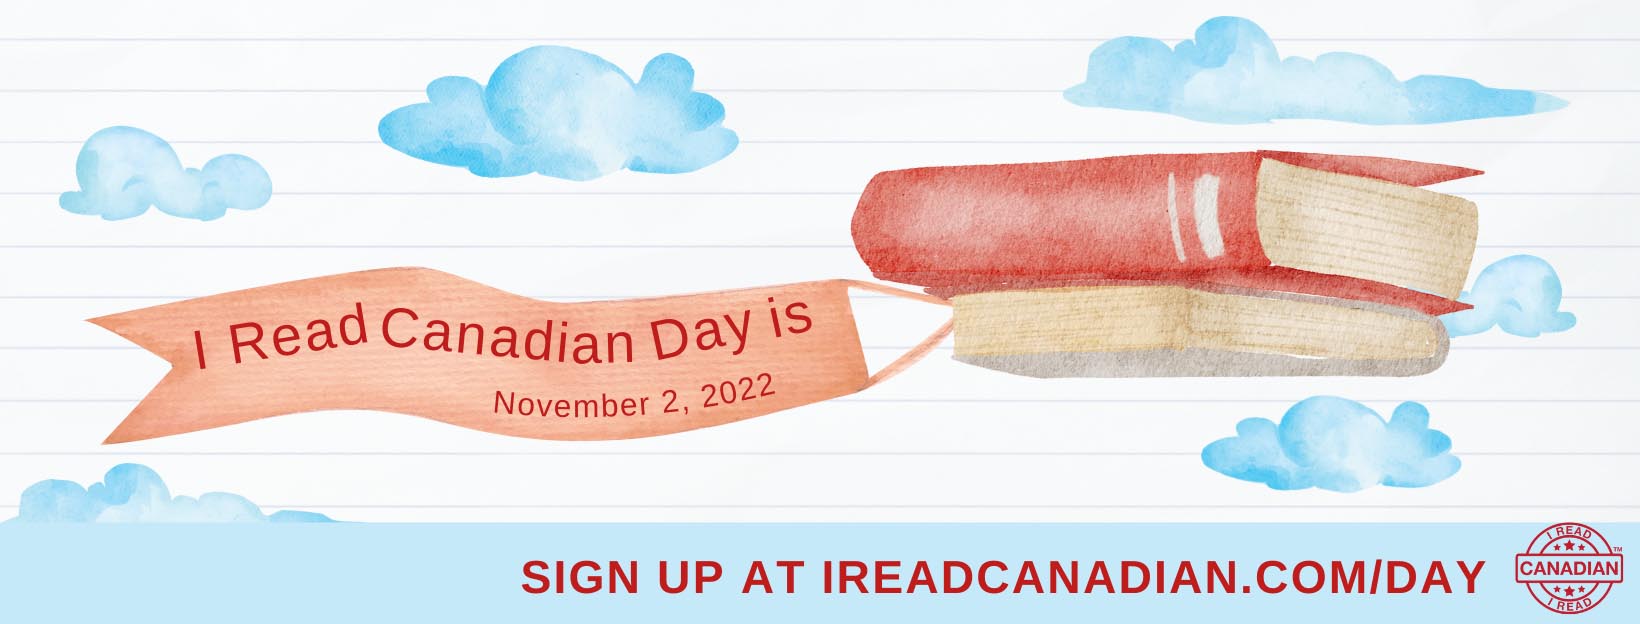 I read Canadian day is November 2, 2022